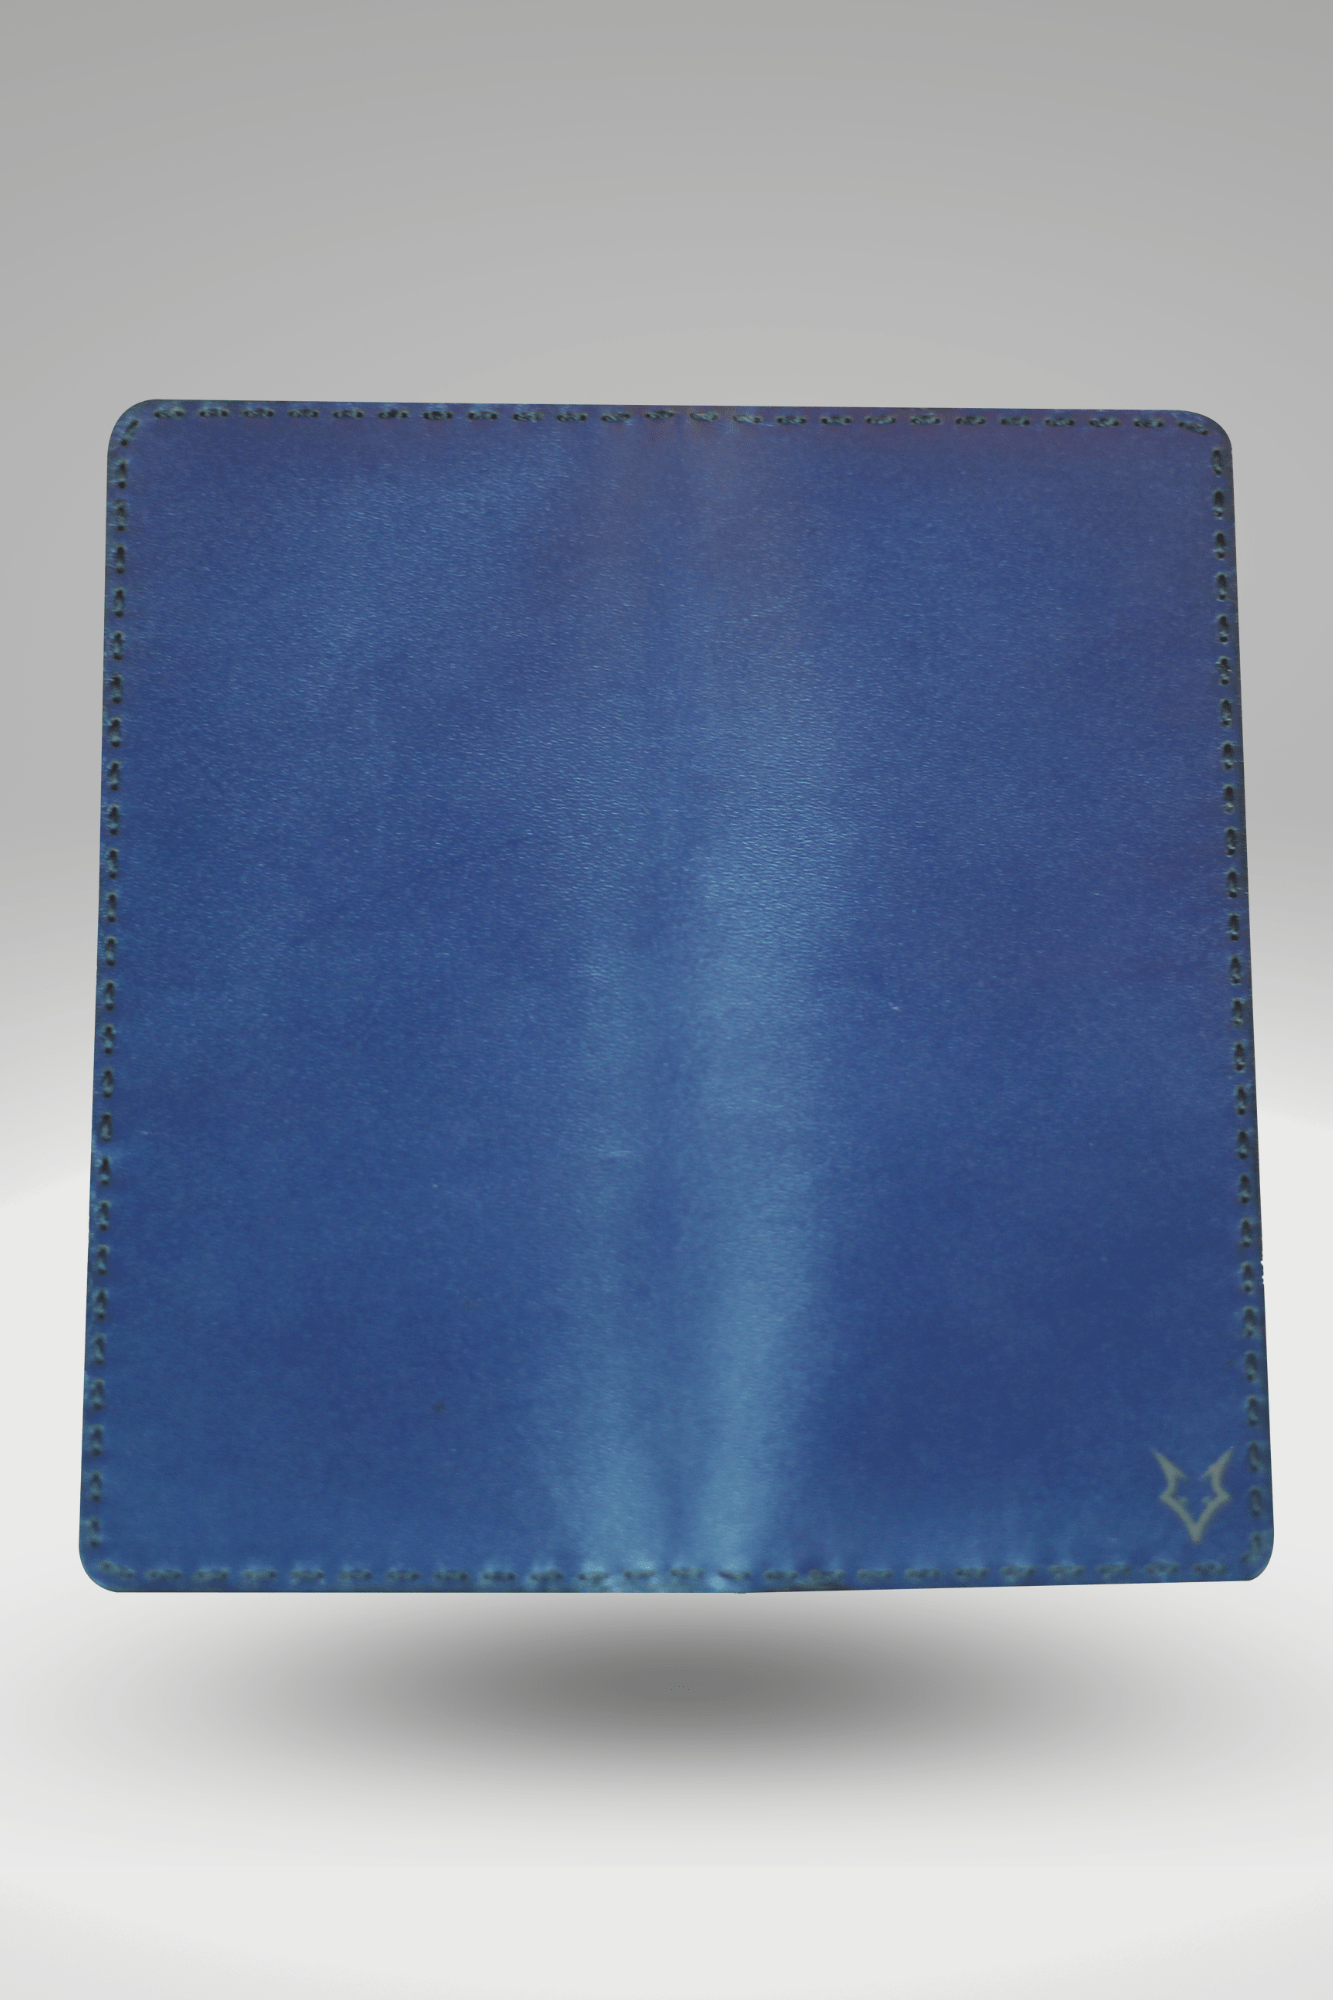 Unisex Soft Genuine Cowhide Leather Wallet In Royal Blue | Bi-fold Hand-Stitched Leather Long Wallet